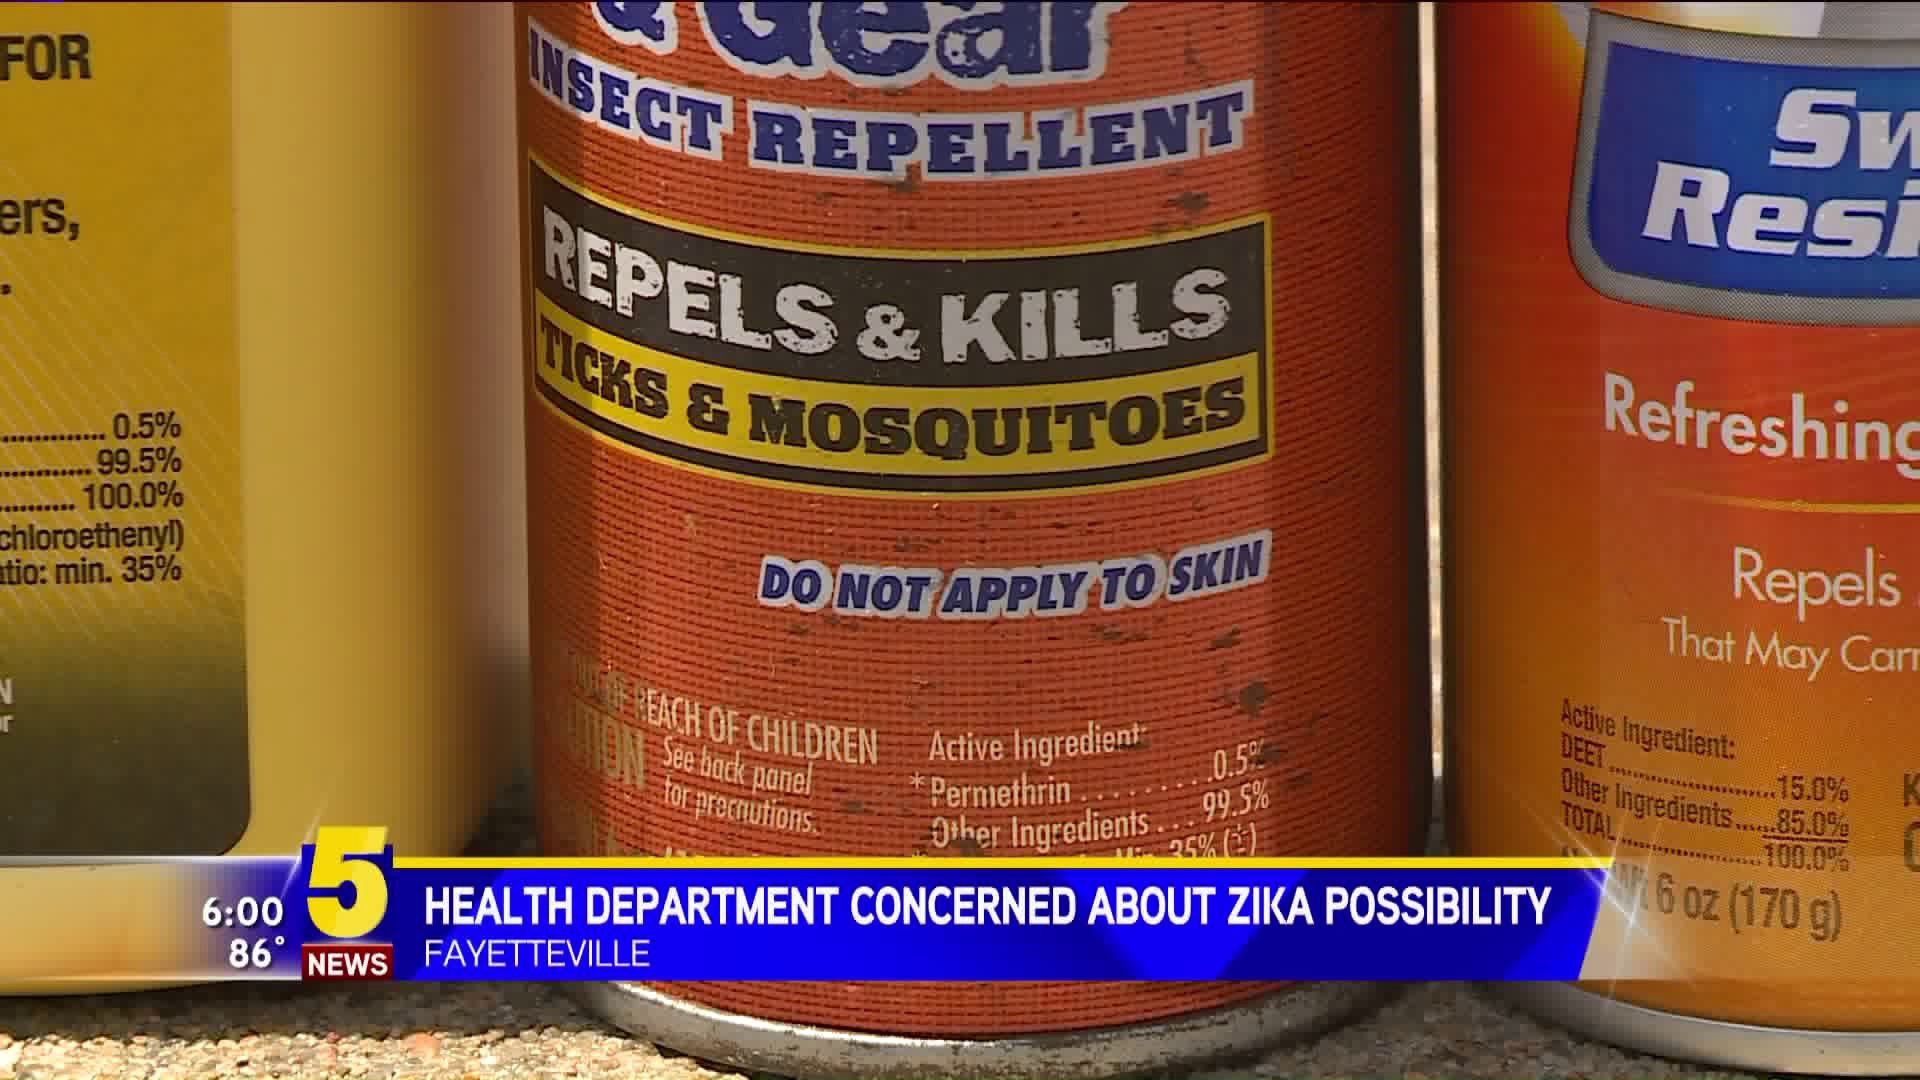 Health Department Concerned About Zika Possibility